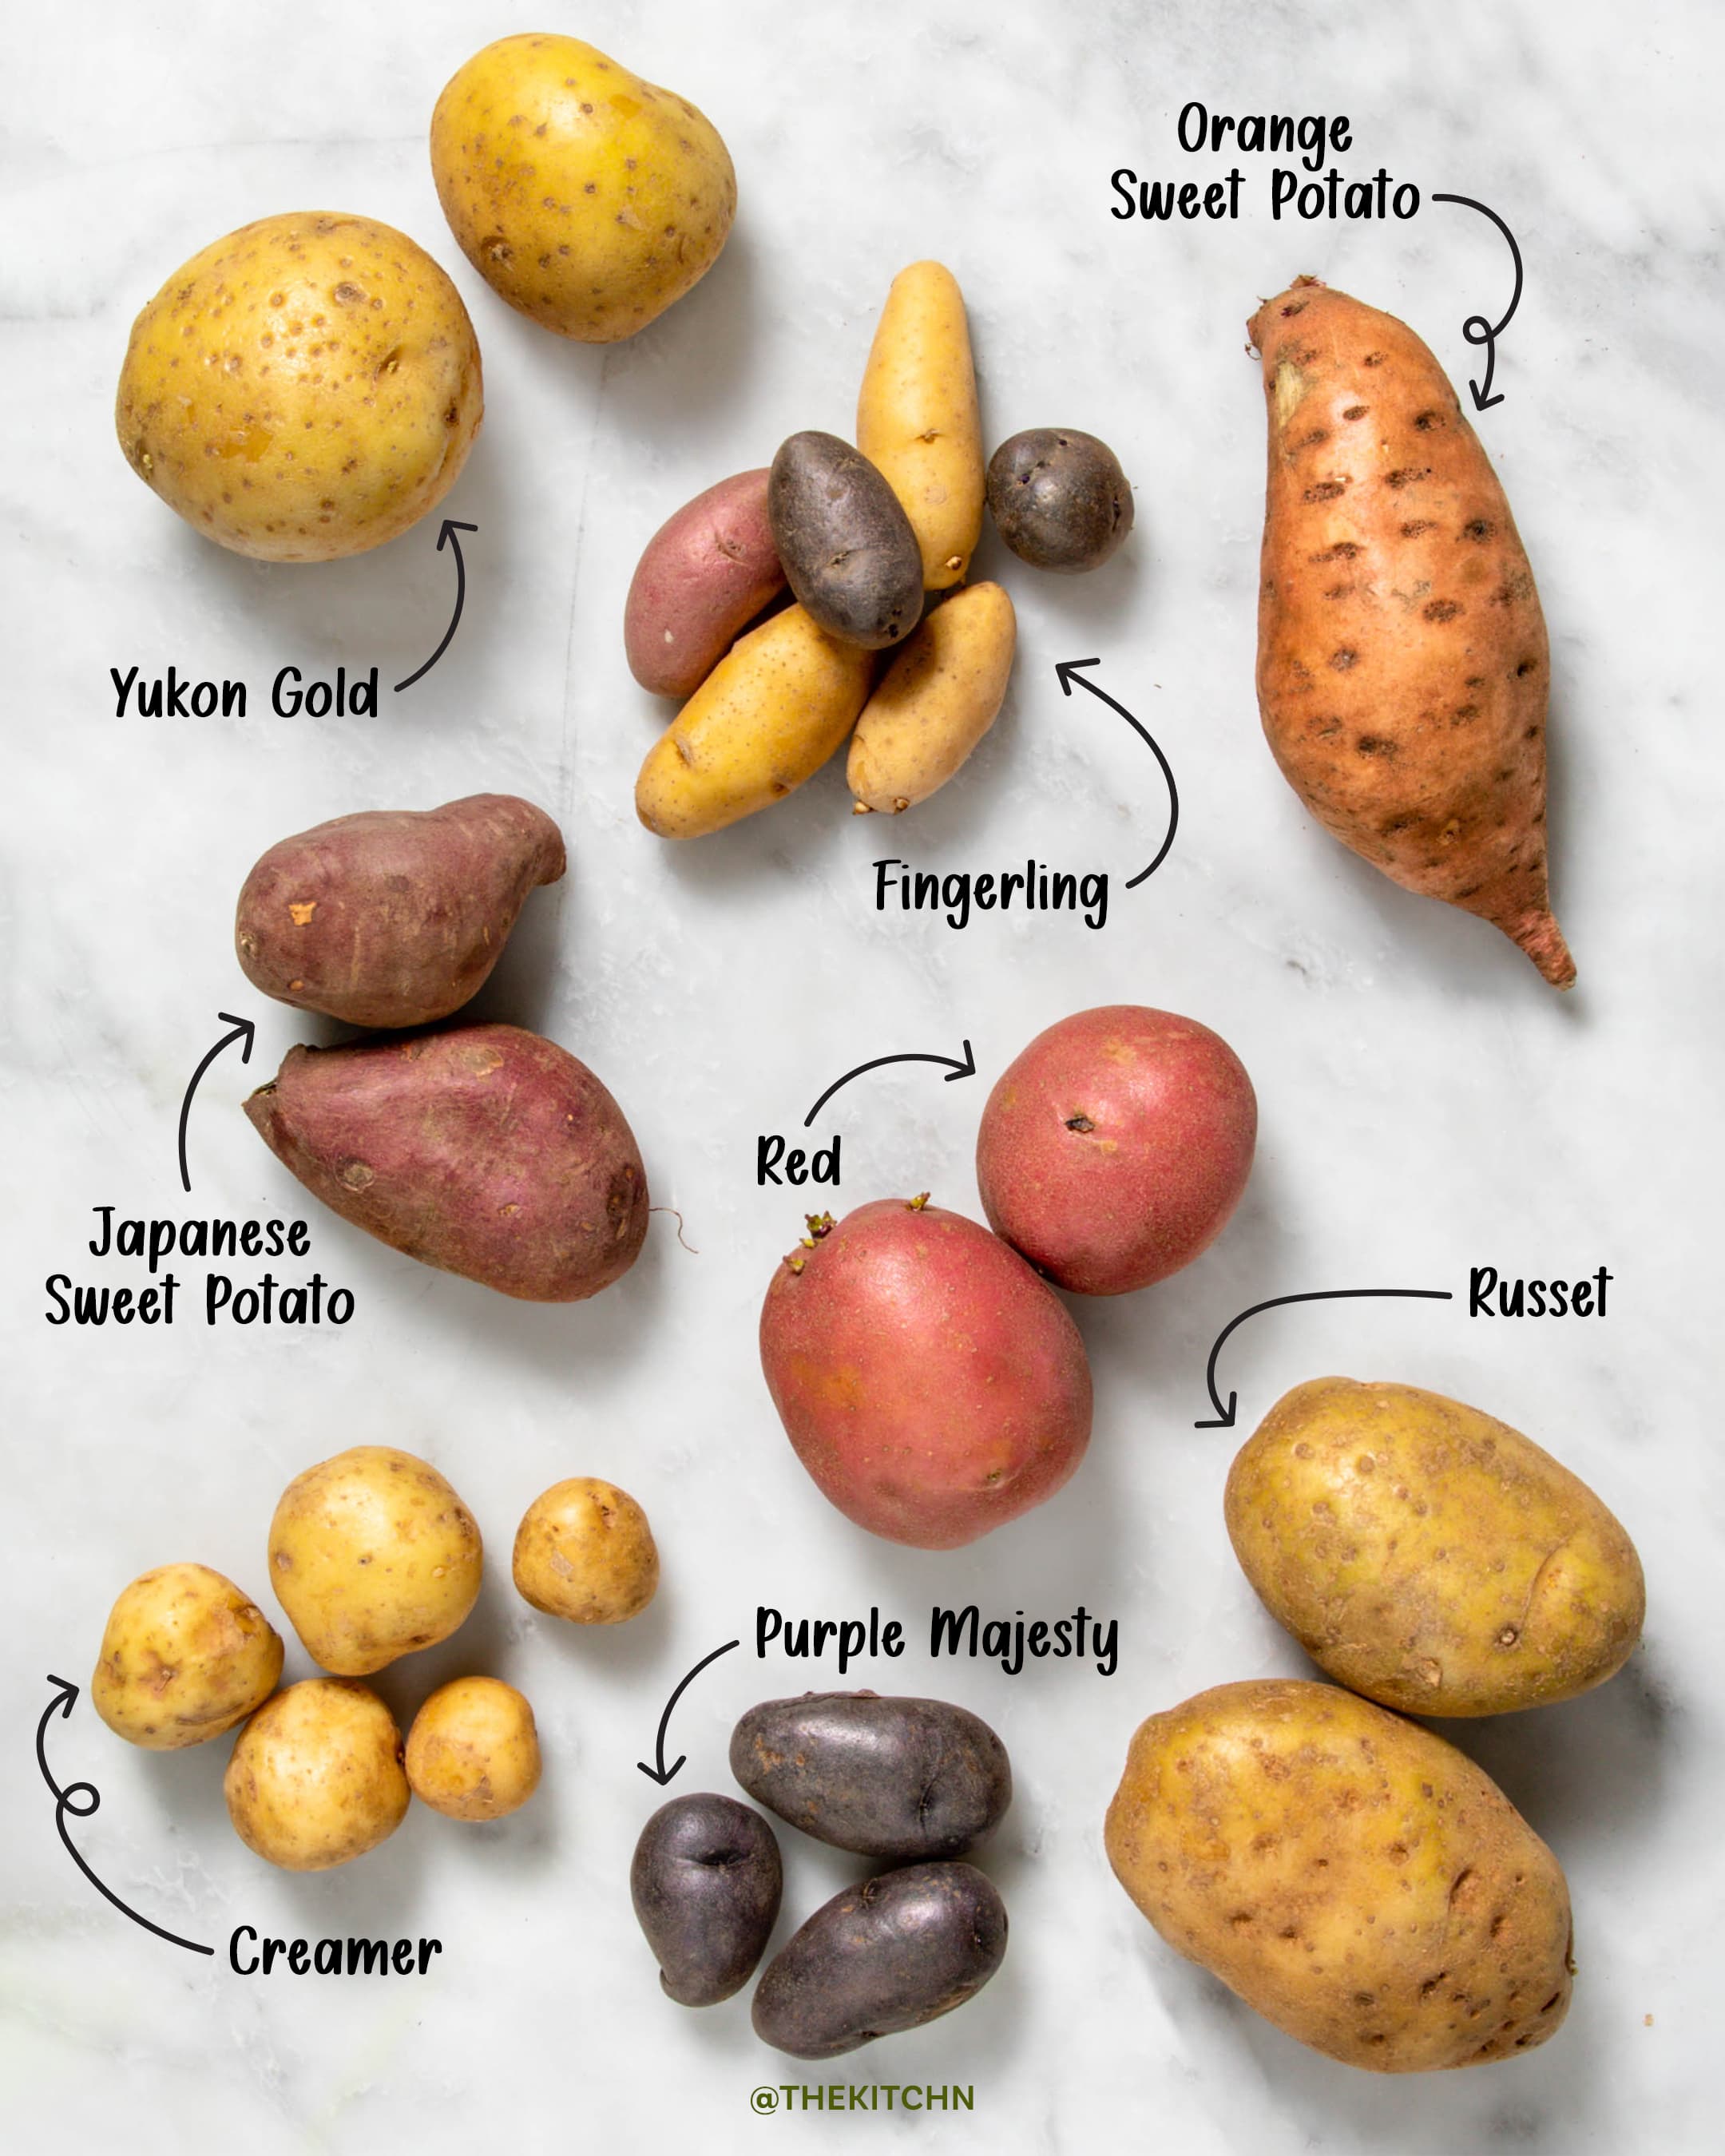 Watch Picking The Right Potato For Every Recipe - The Big Guide